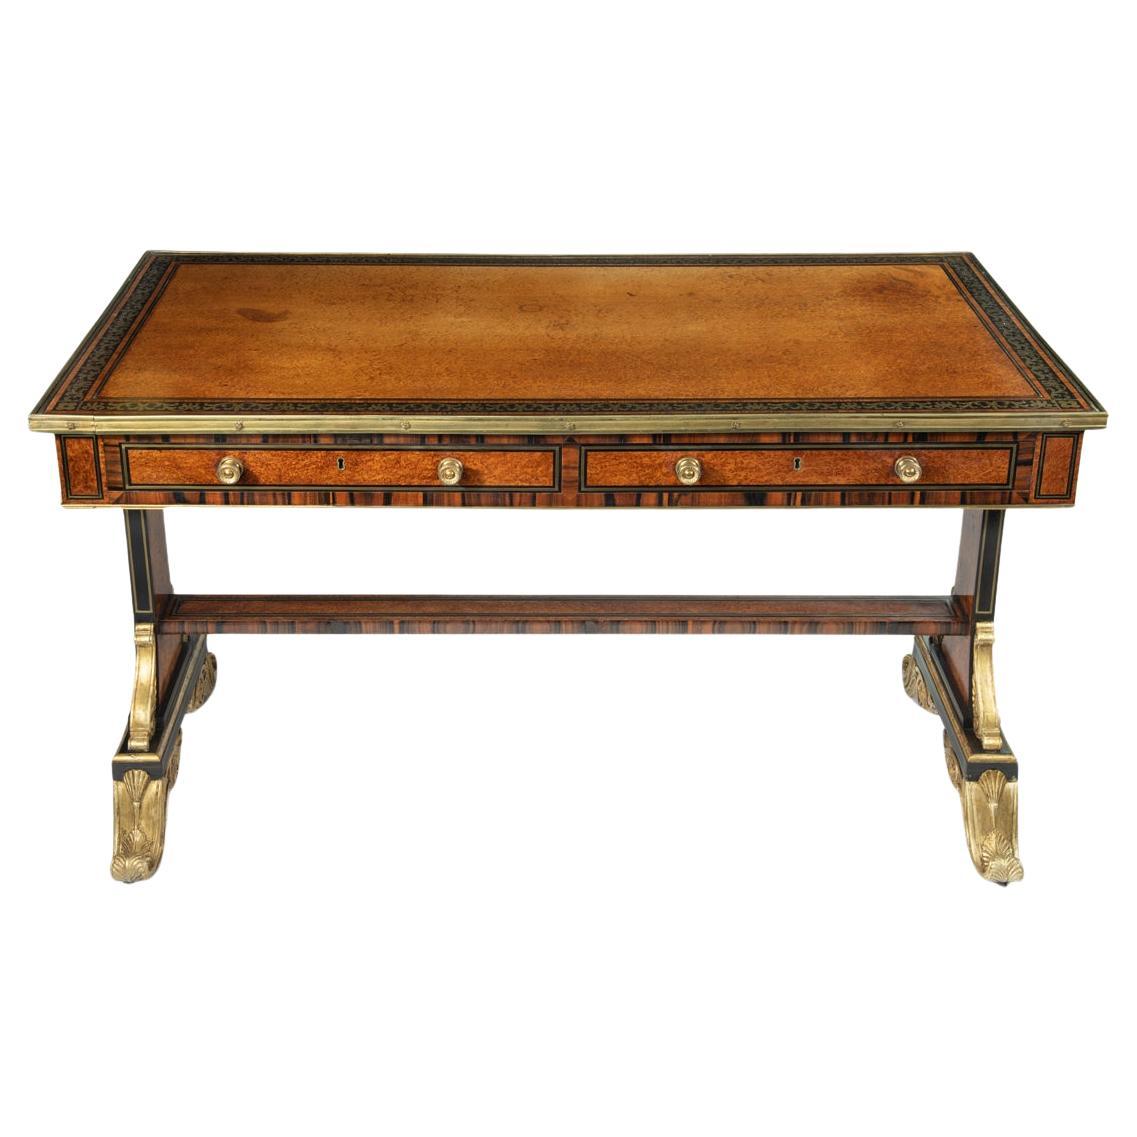 An outstanding and important Regency writing table by William Jamar